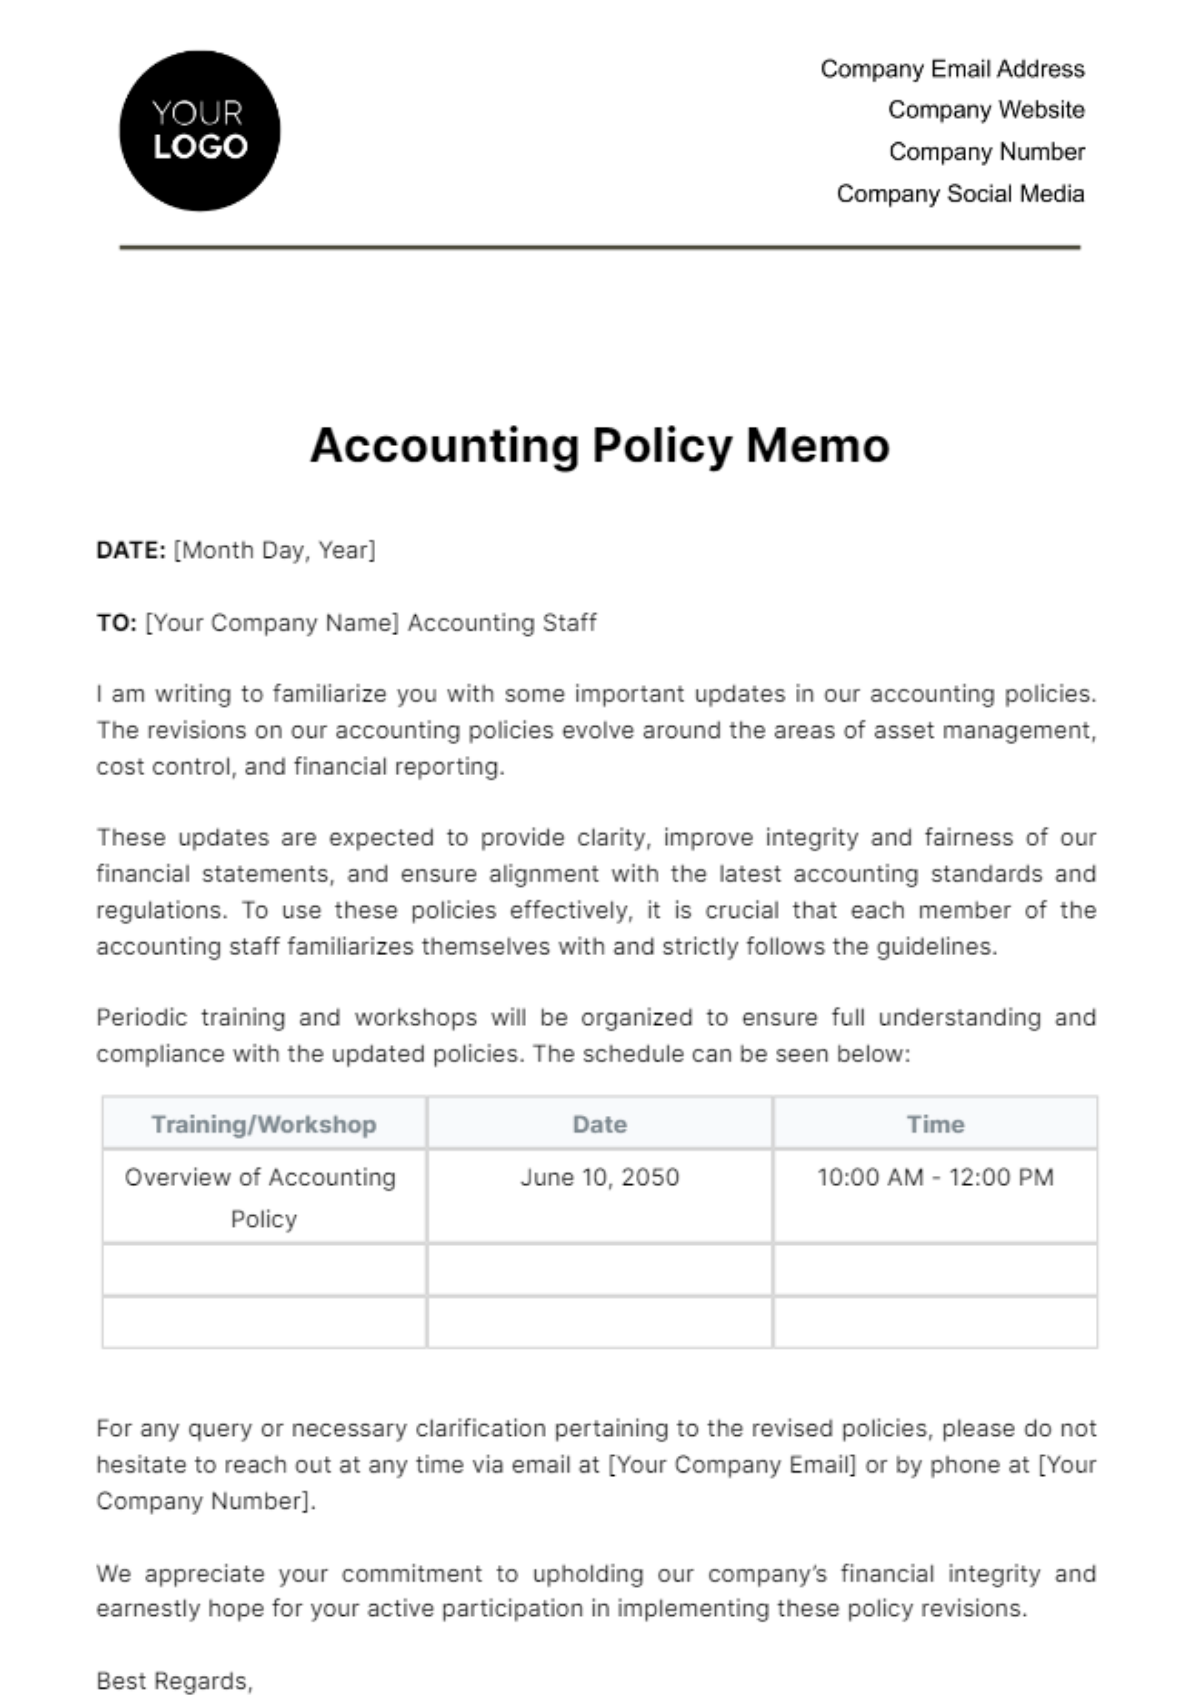 Free Accounting Policy Memo Template